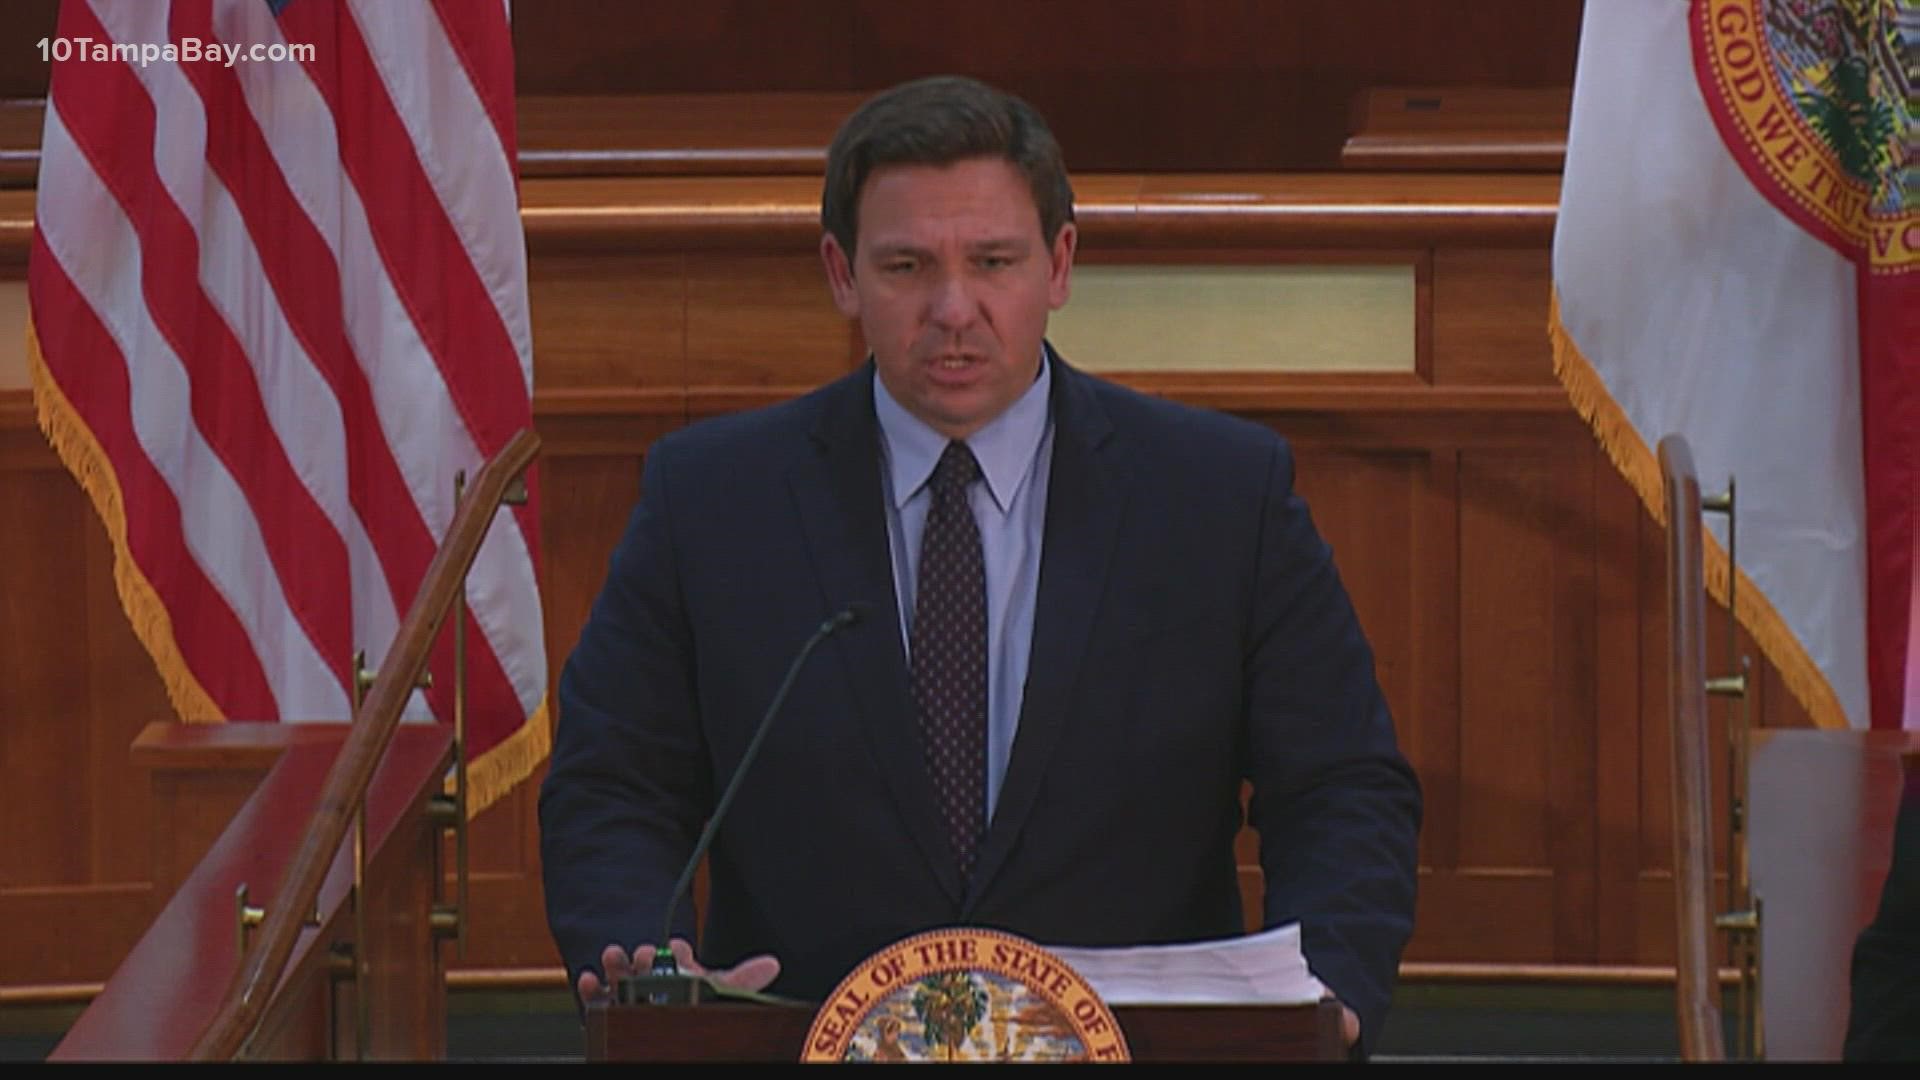 Gov. Ron DeSantis and Attorney General Ashley Moody said the state plans to sue the federal government after OSHA announced new vaccination rules for employers.